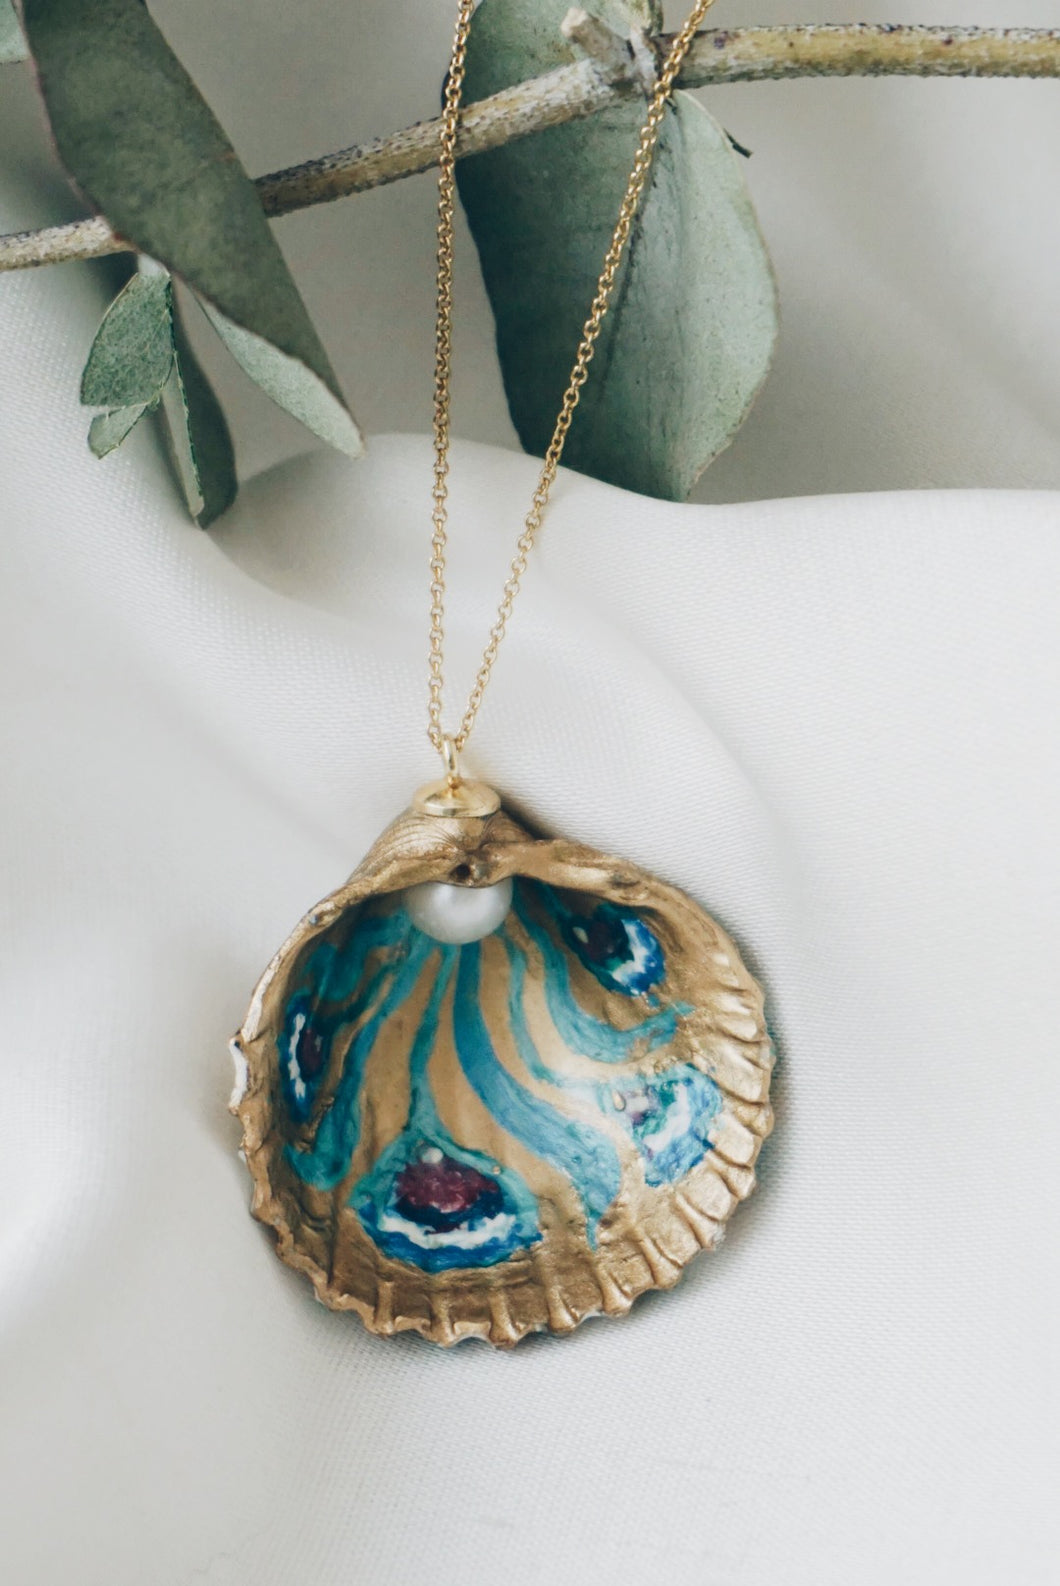 Bloom seashell necklace